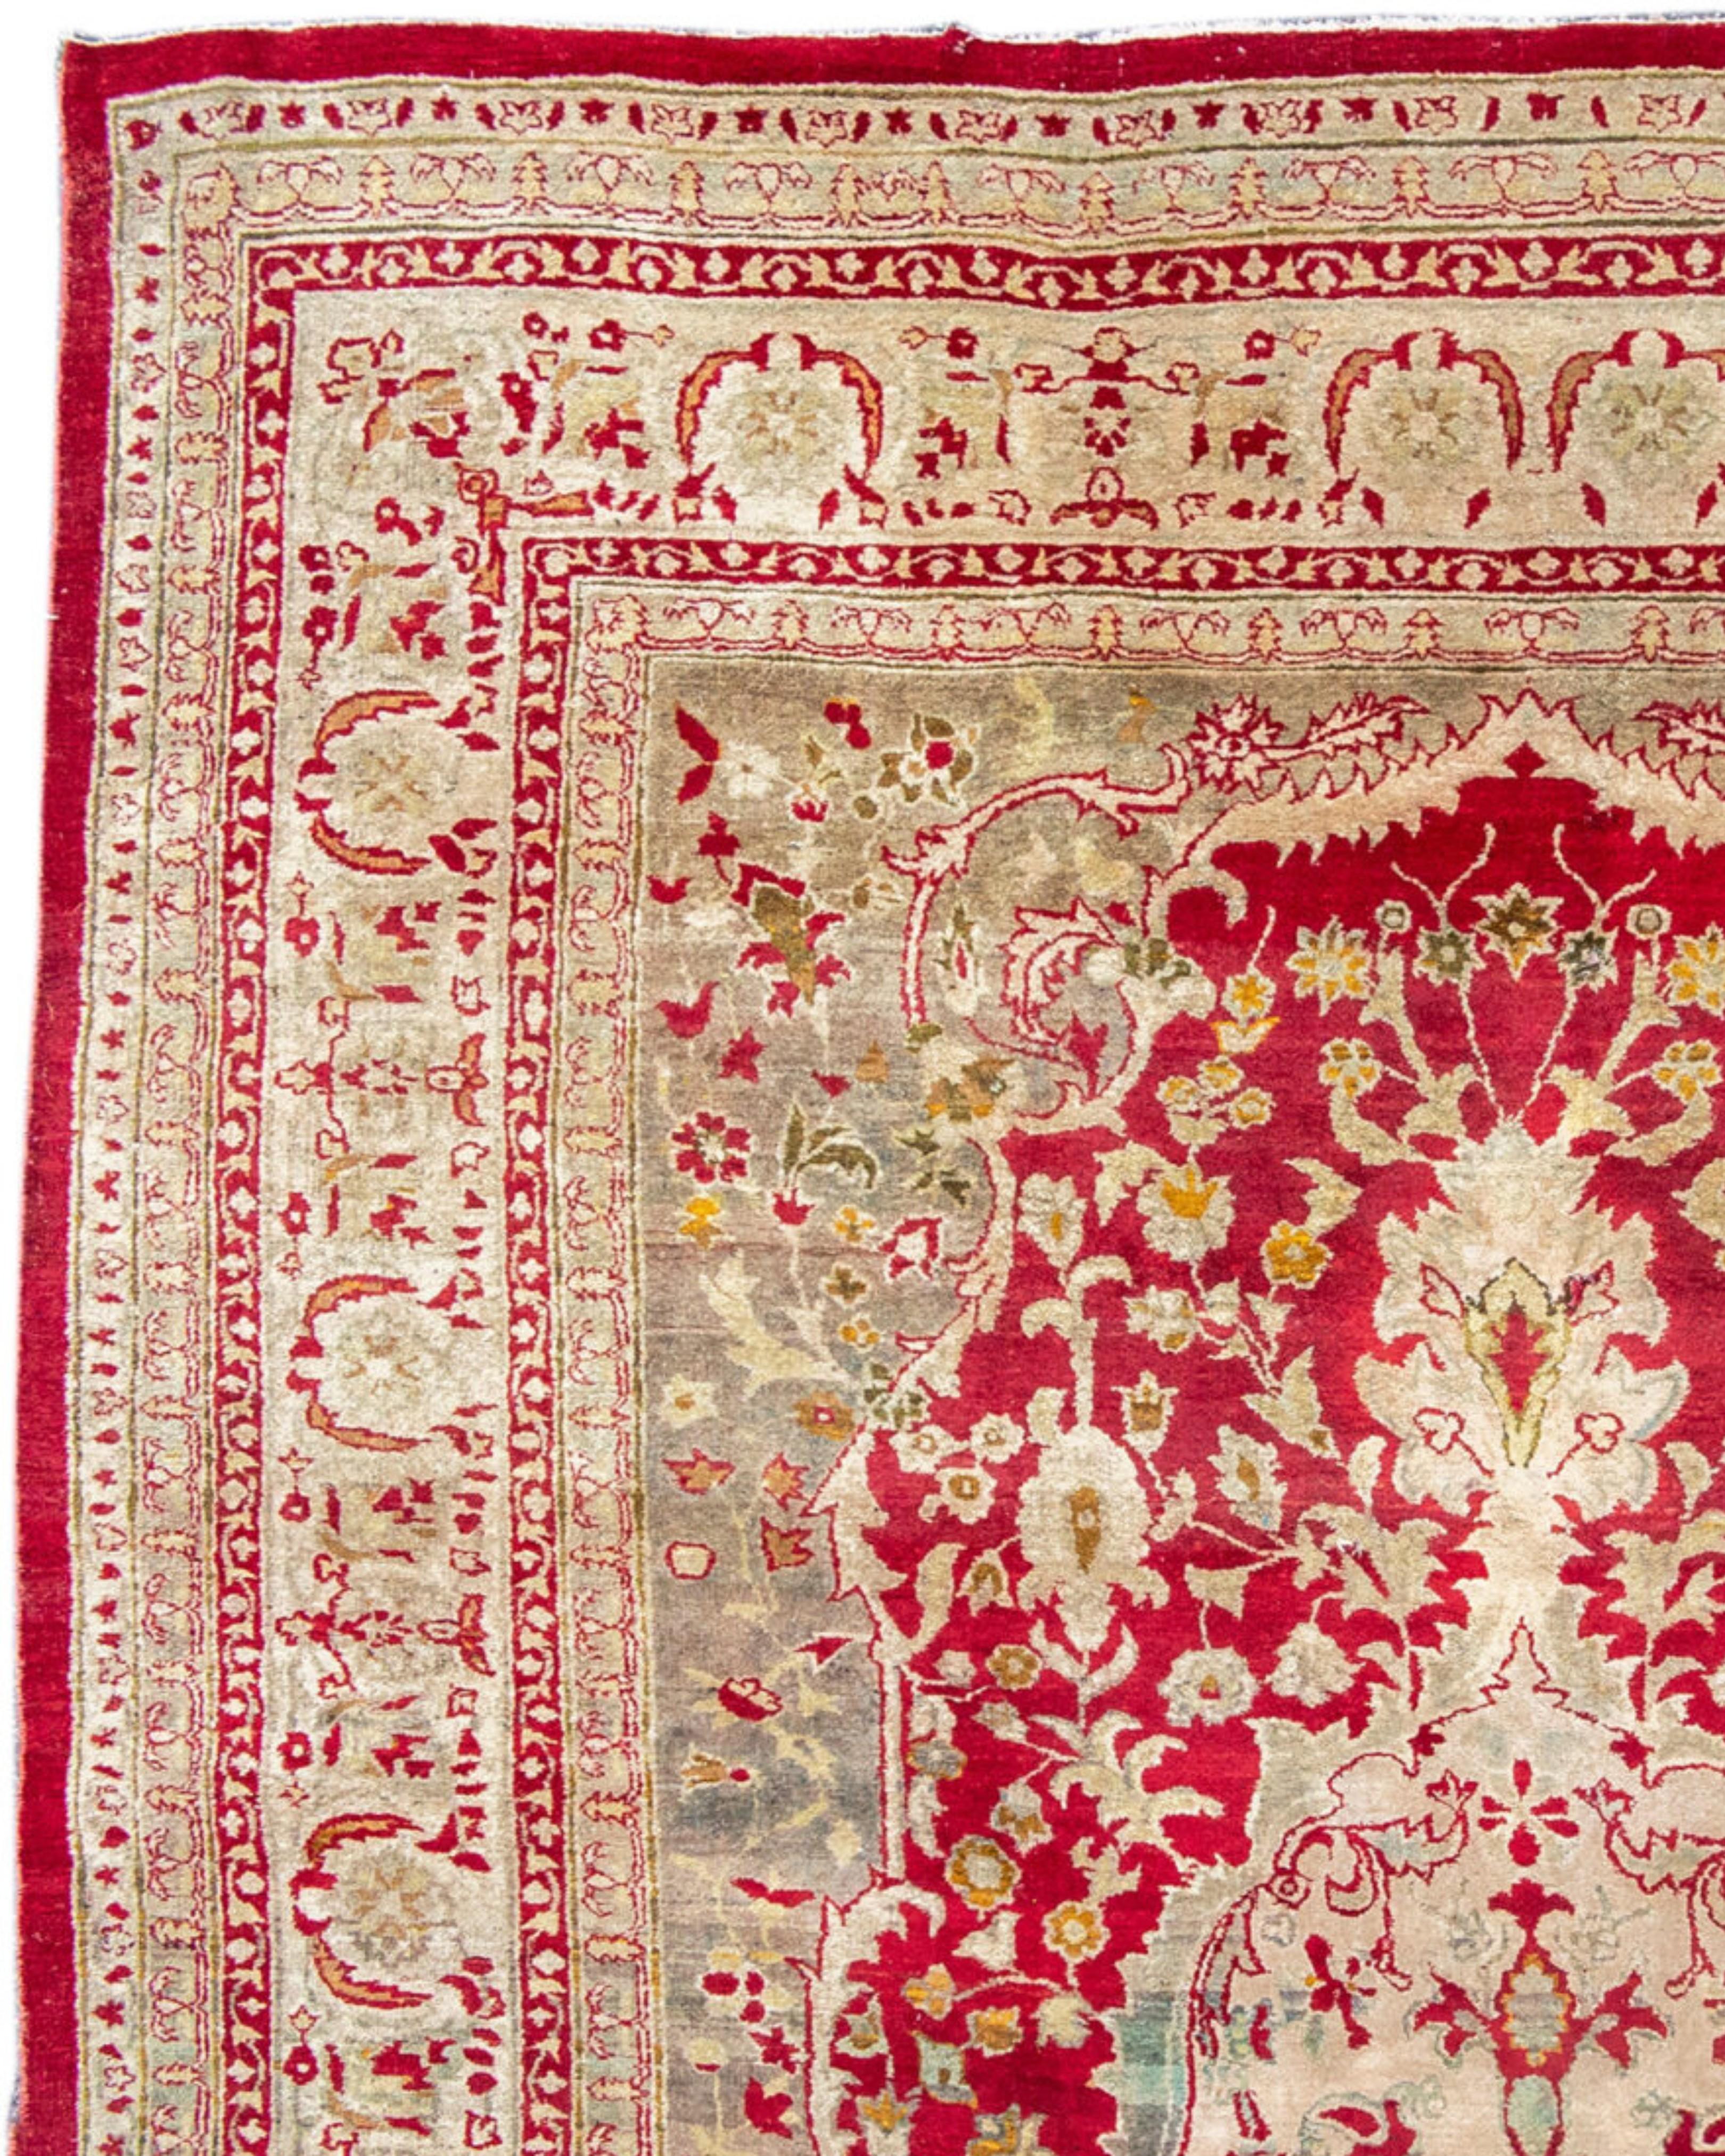 Antique Red and Gold Indian Agra Carpet, Late 19th Century In Excellent Condition For Sale In San Francisco, CA